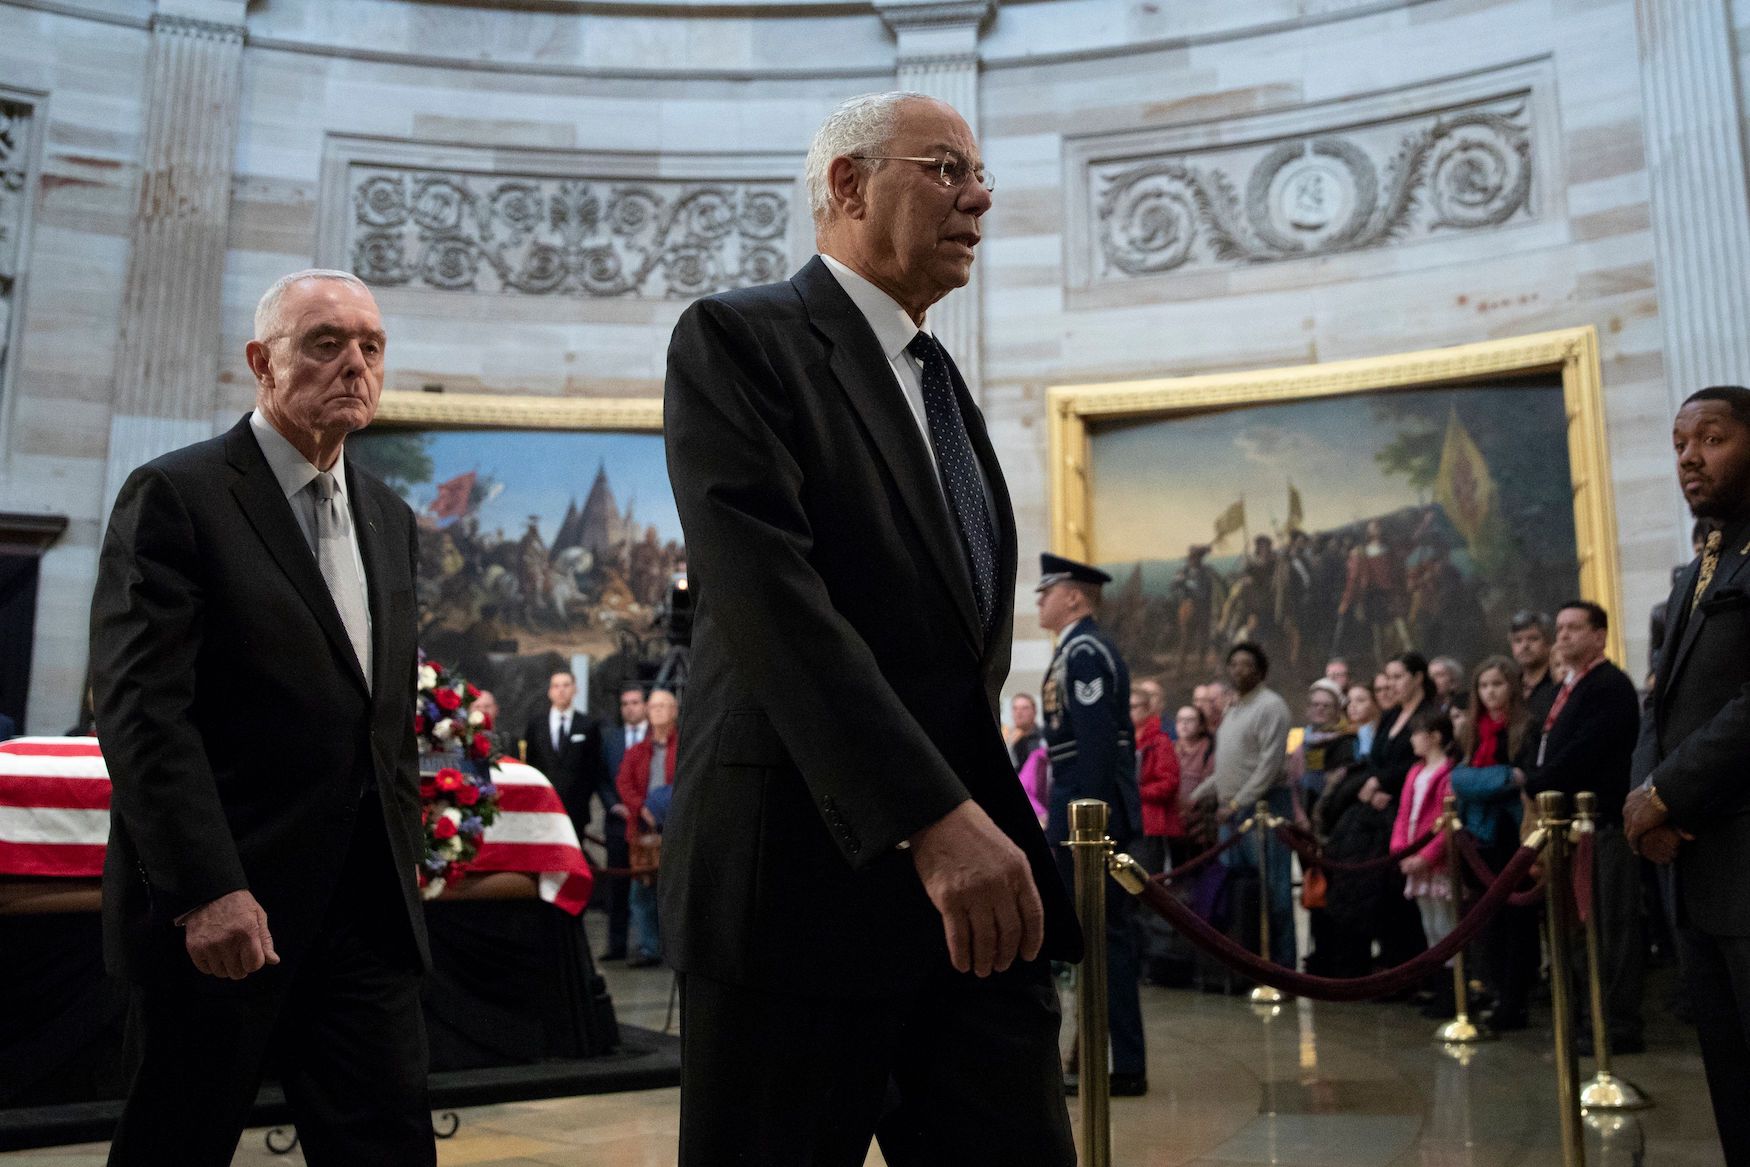 Colin Powell walking through a crowd to memorialize George H.W. Bush